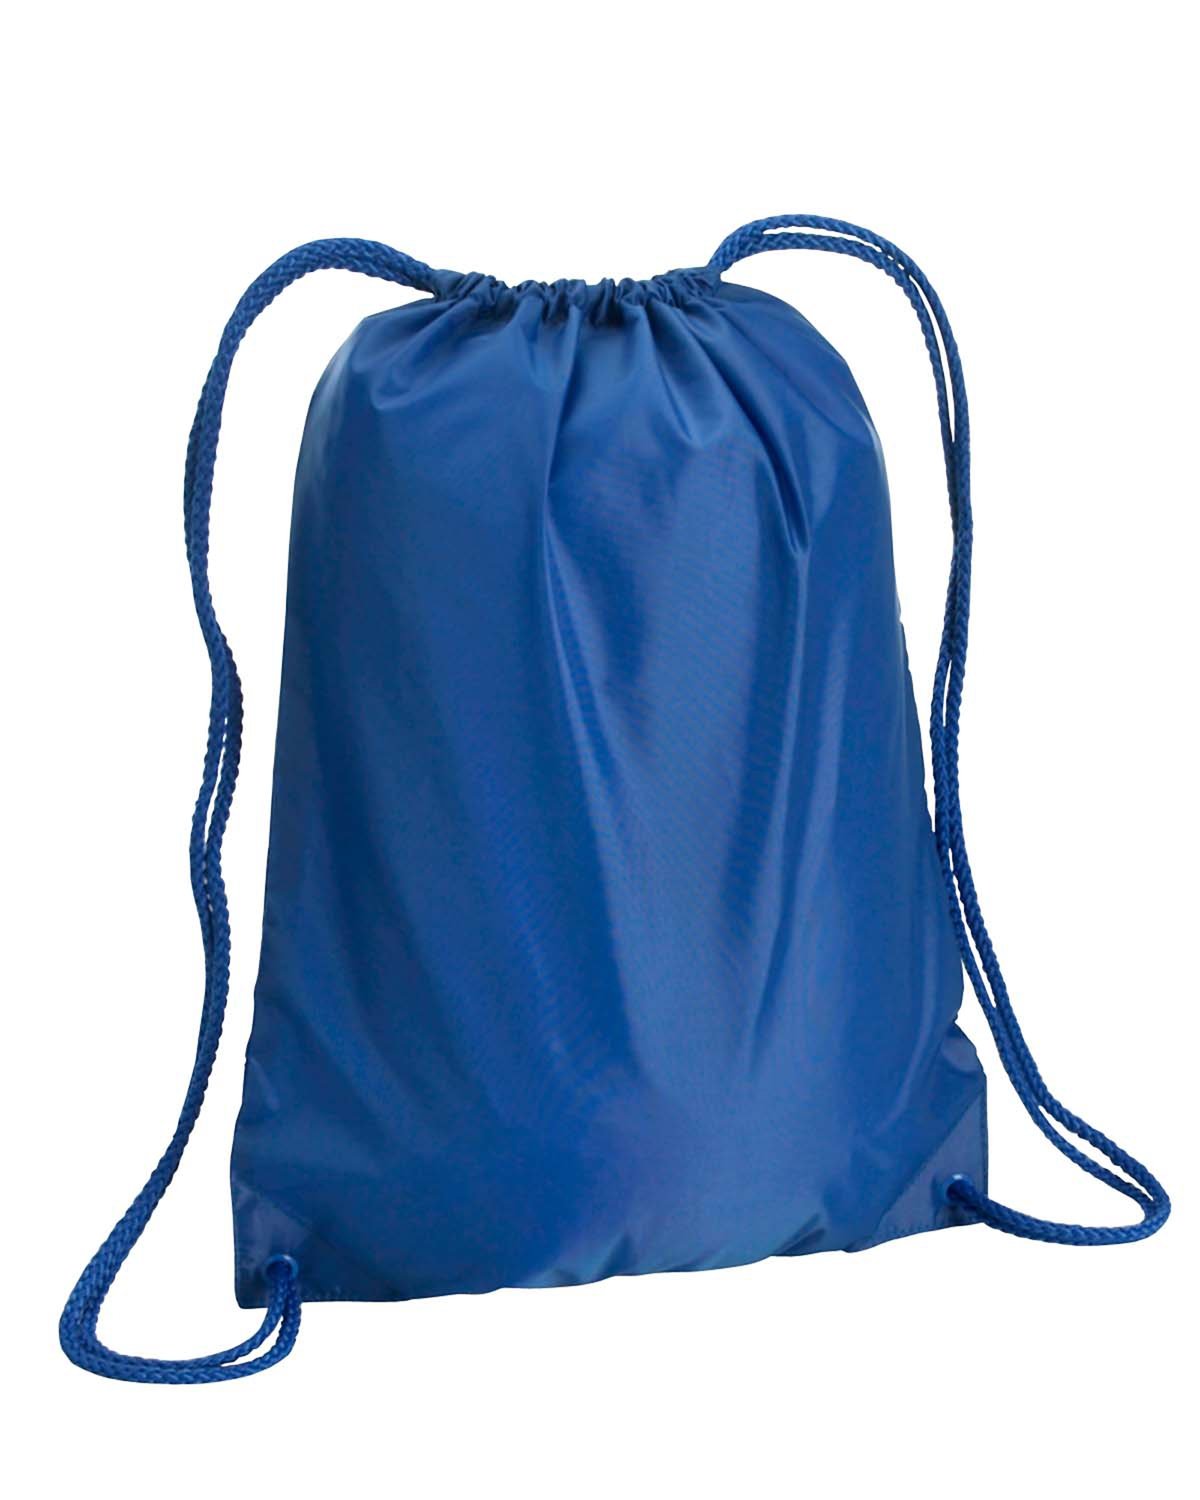 Waterproof Drawstring Shoulder Back Pack with One Color/One Location Imprint